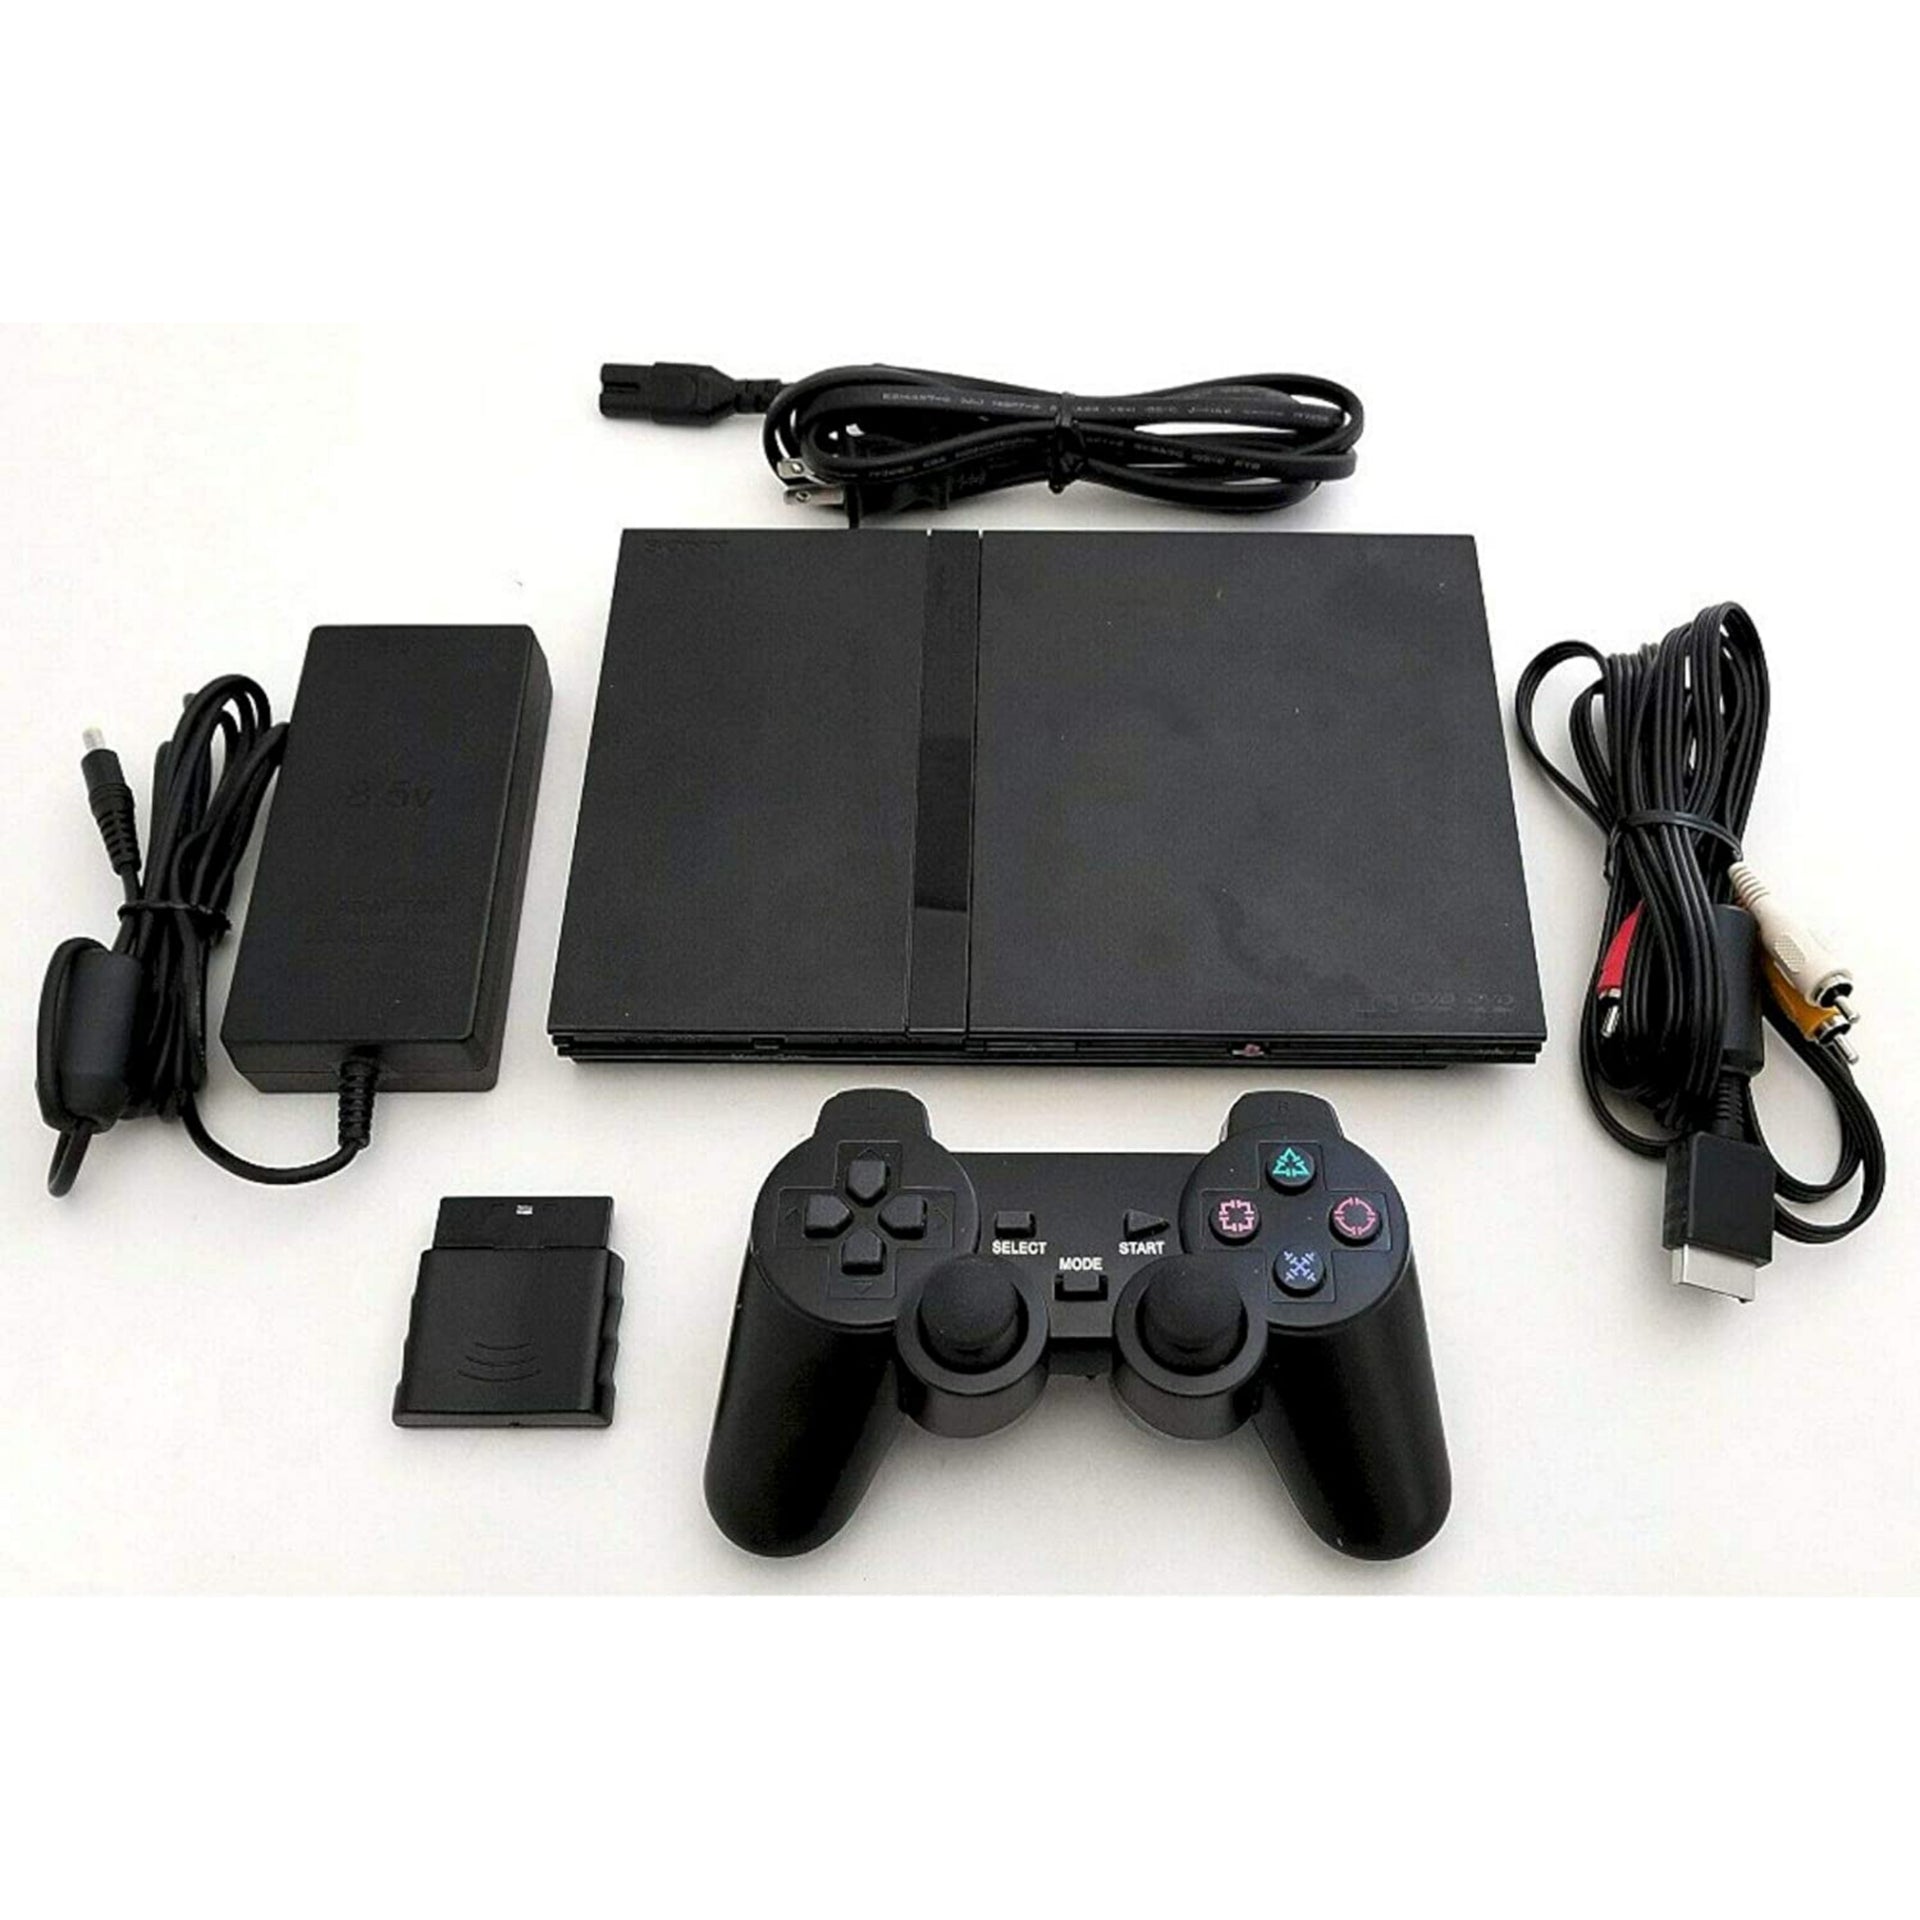 Sony Playstation 2 (PS2) Slim Game Console Complete Set with 2 DUALSHO –  IFESOLOX